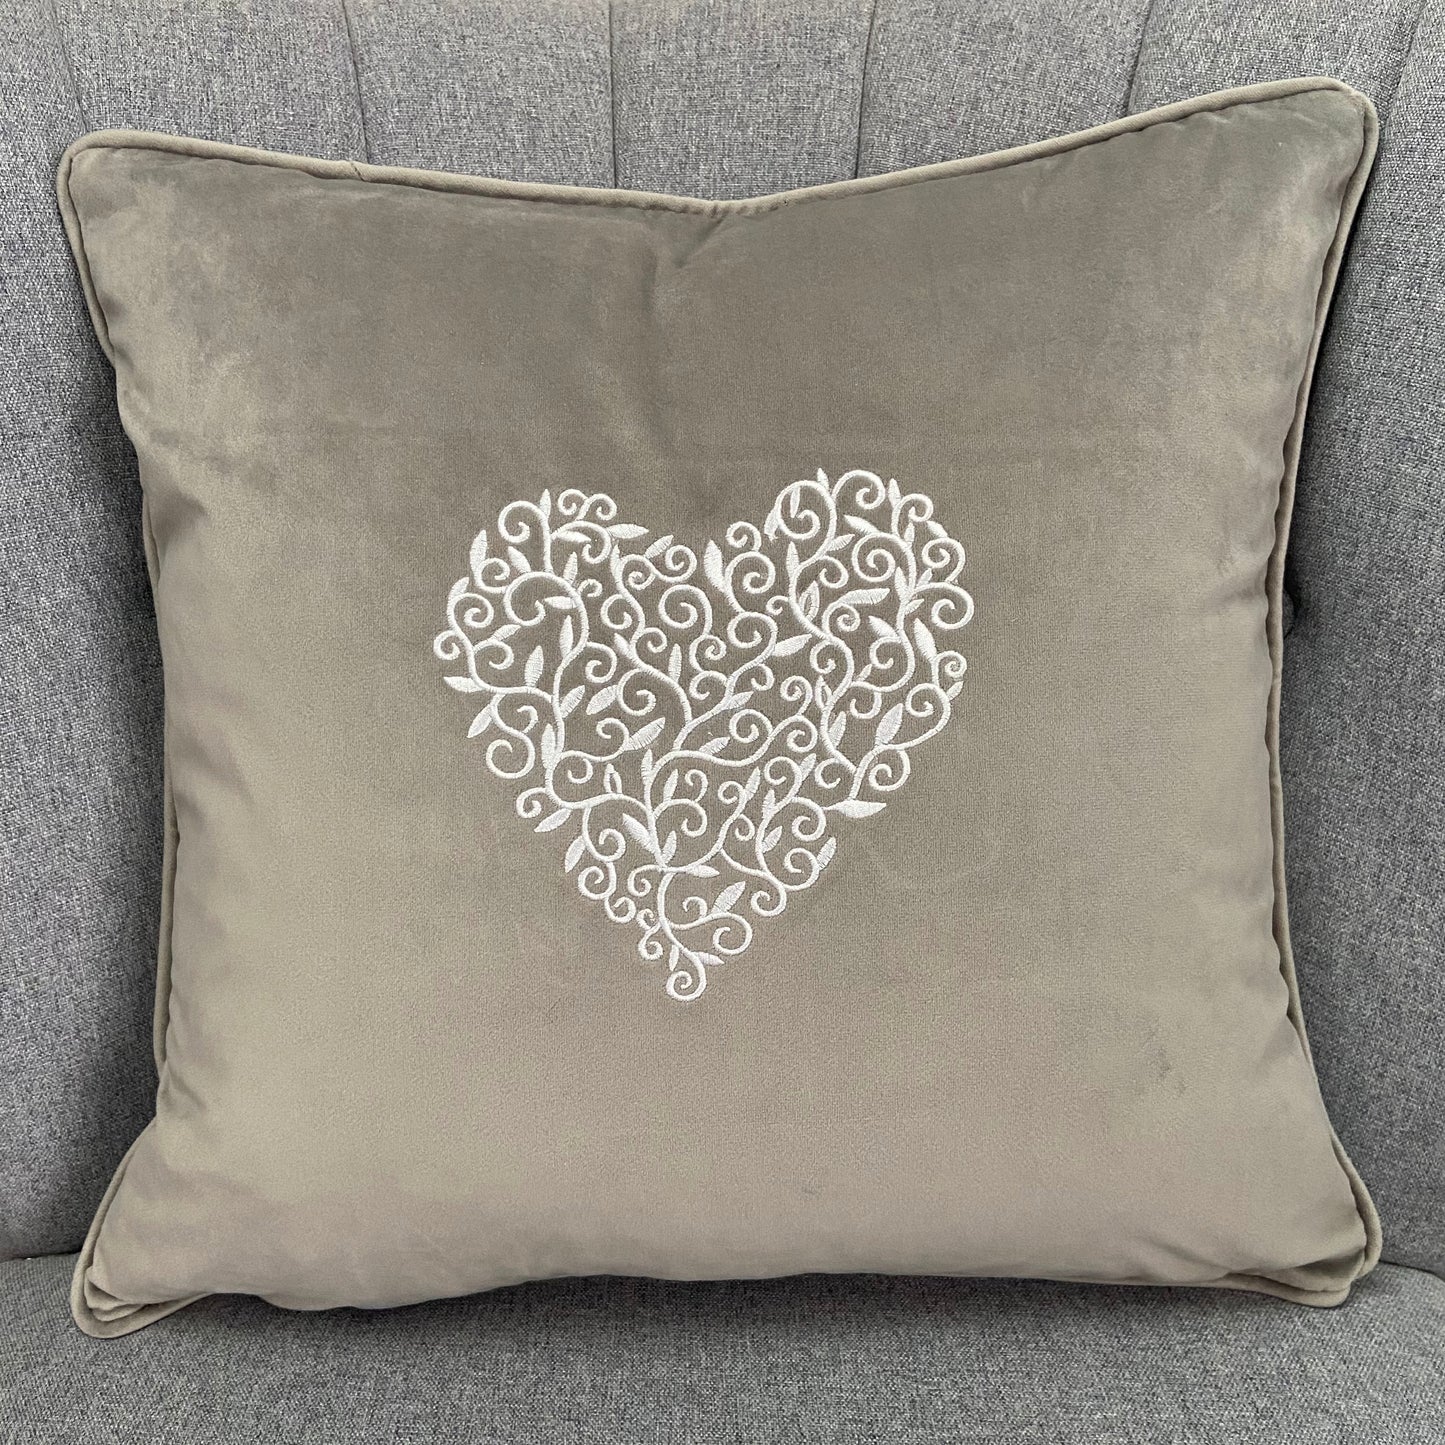 Detailed Heart Velour Embroidered Cushion Cover